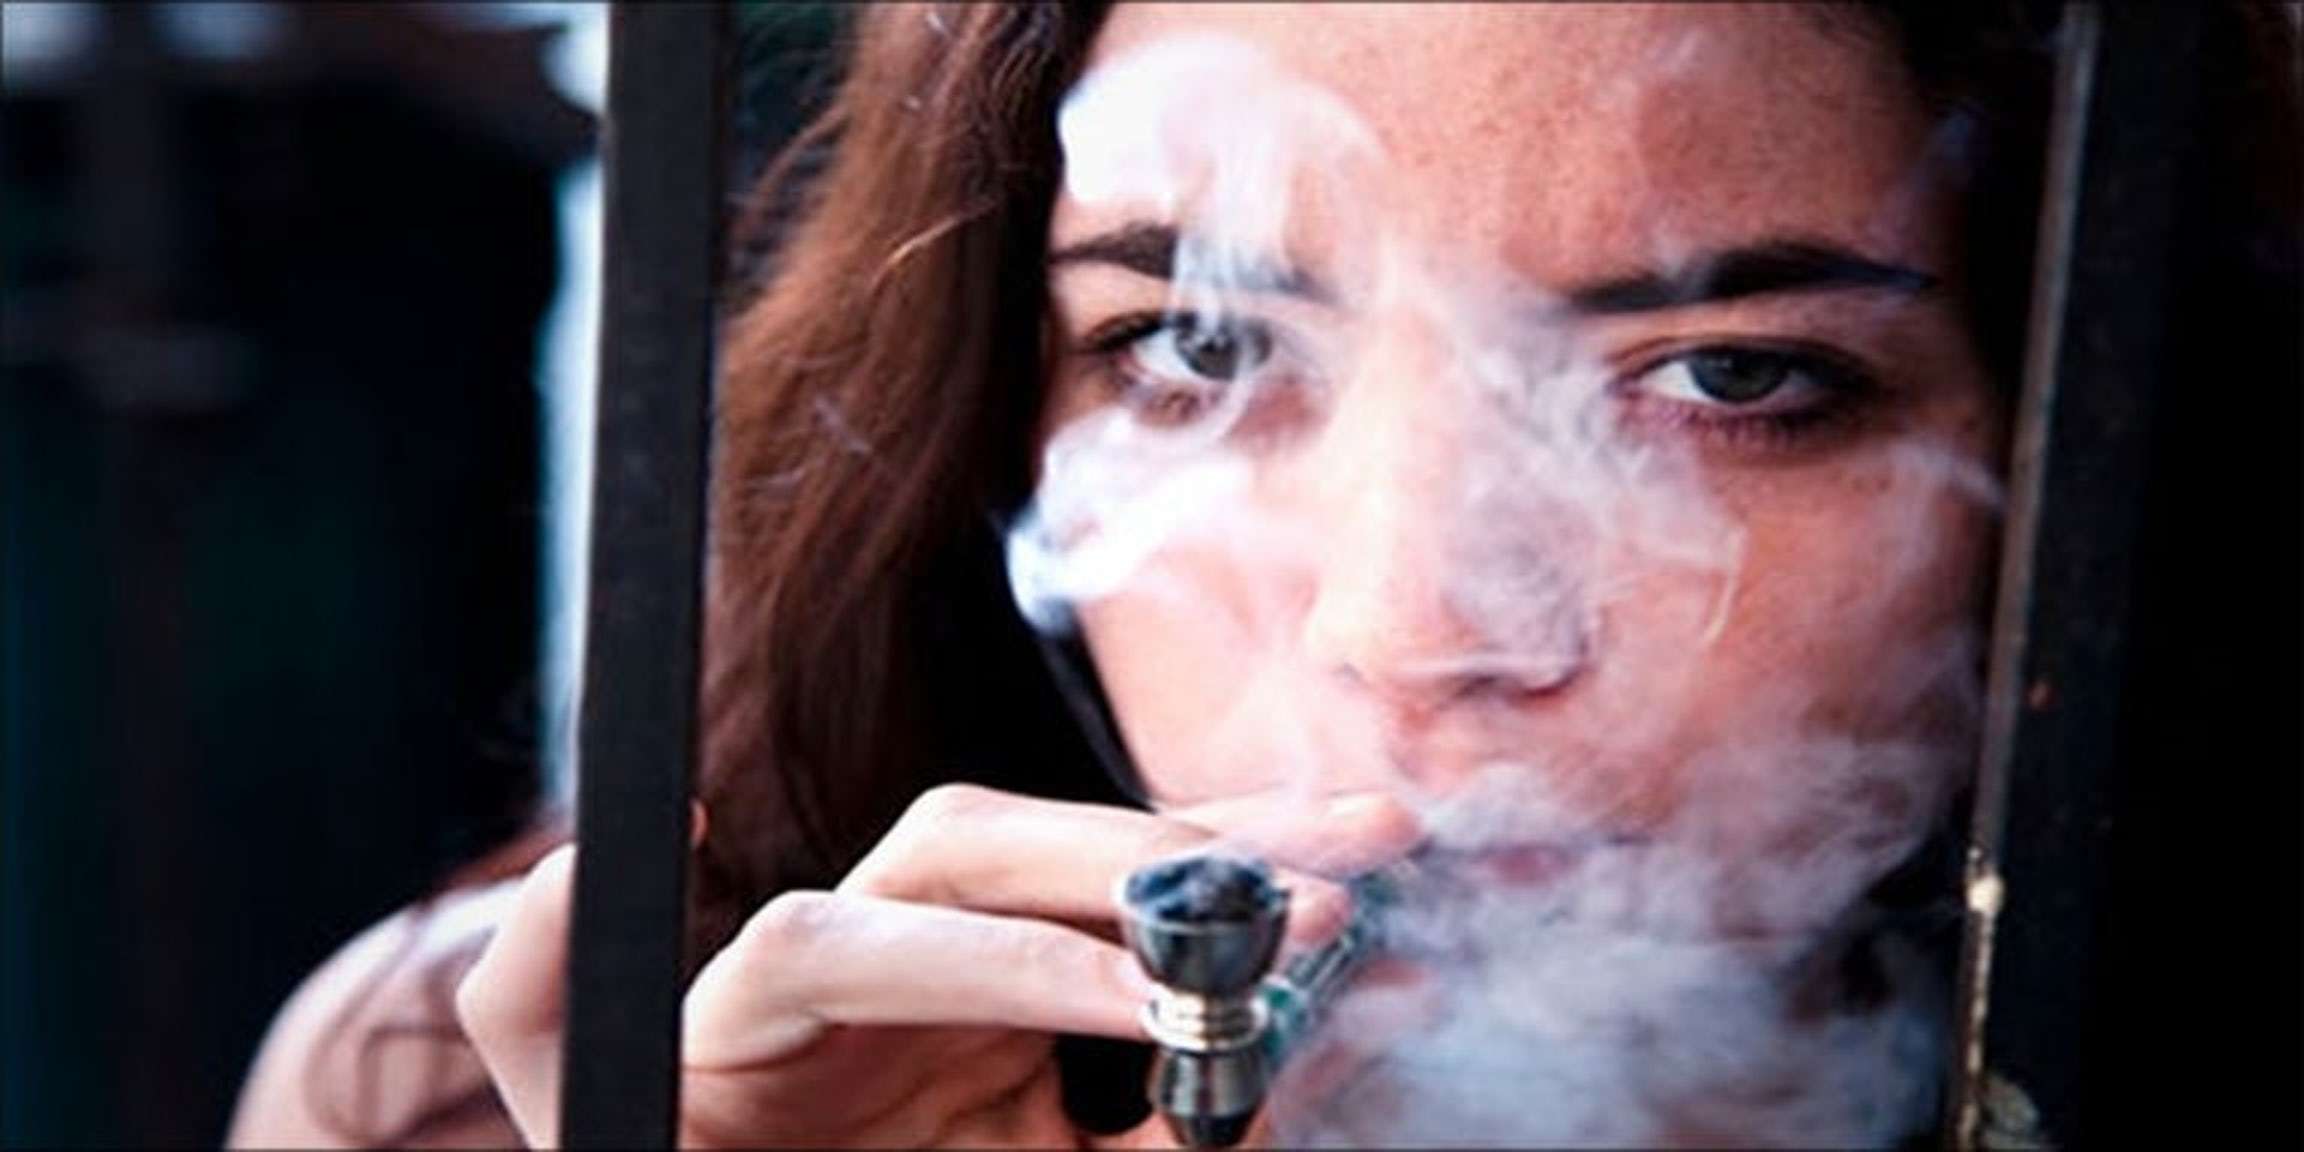 Can You Be Addicted To Weed And What Are The Symptoms?